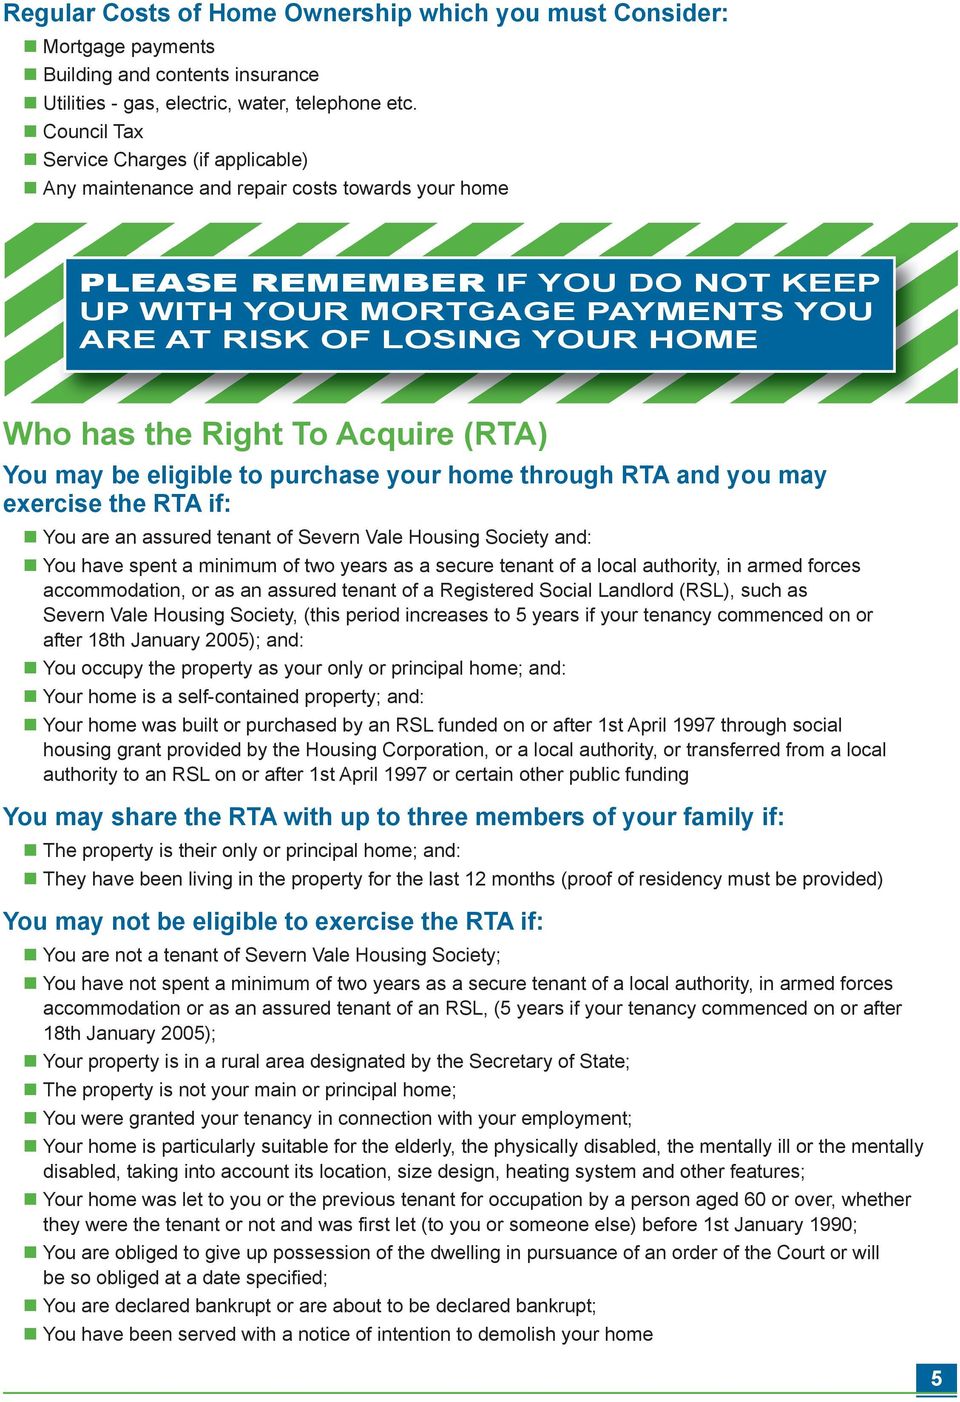 HOME Who has the Right To Acquire (RTA) You may be eligible to purchase your home through RTA and you may exercise the RTA if: n You are an assured tenant of Severn Vale Housing Society and: n You